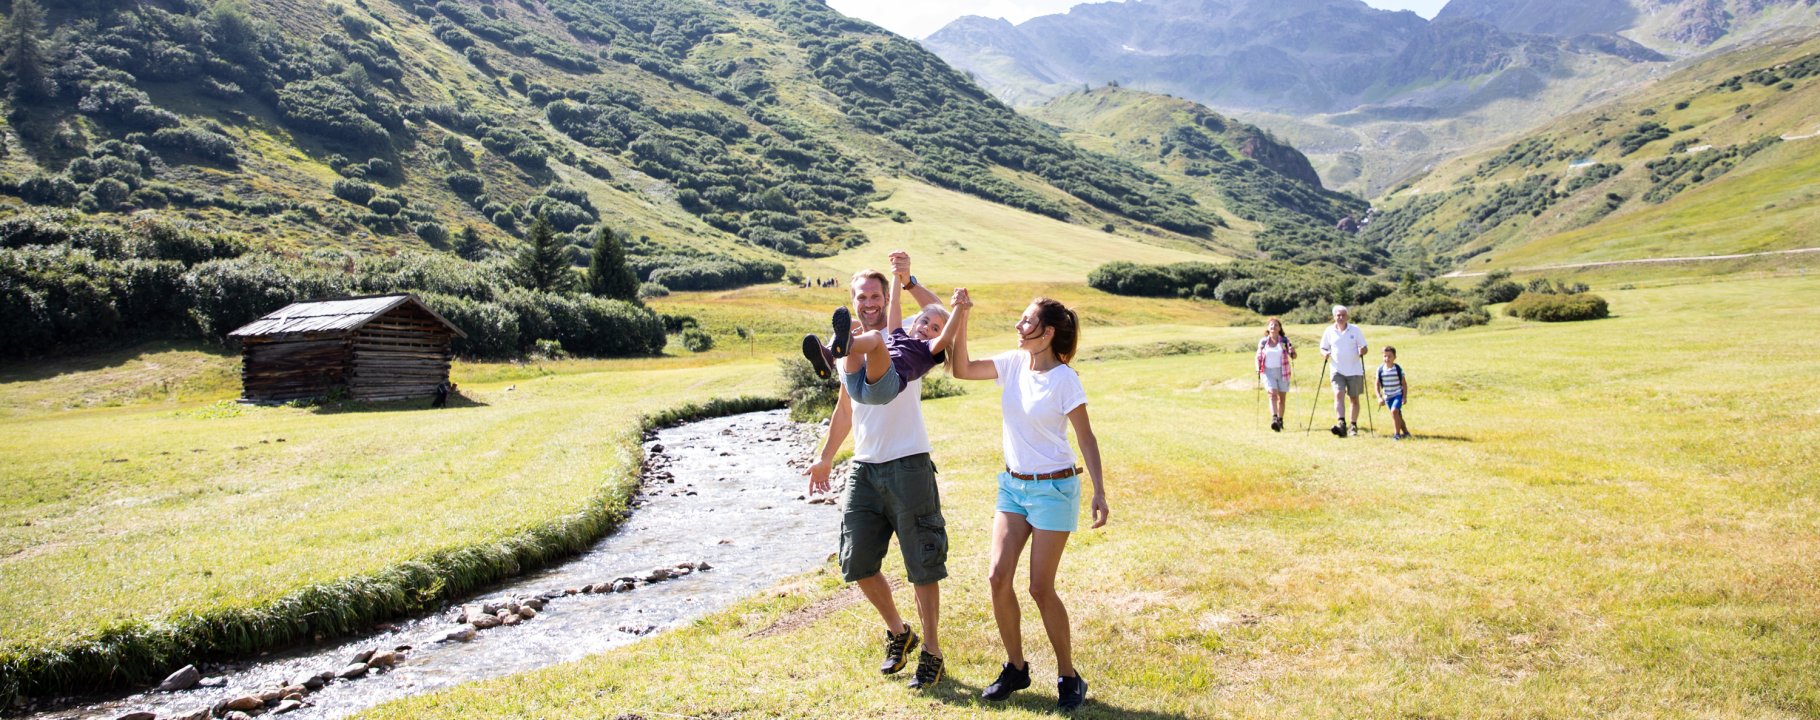 hiking experience for young and old through Serfaus-Fiss-Ladis